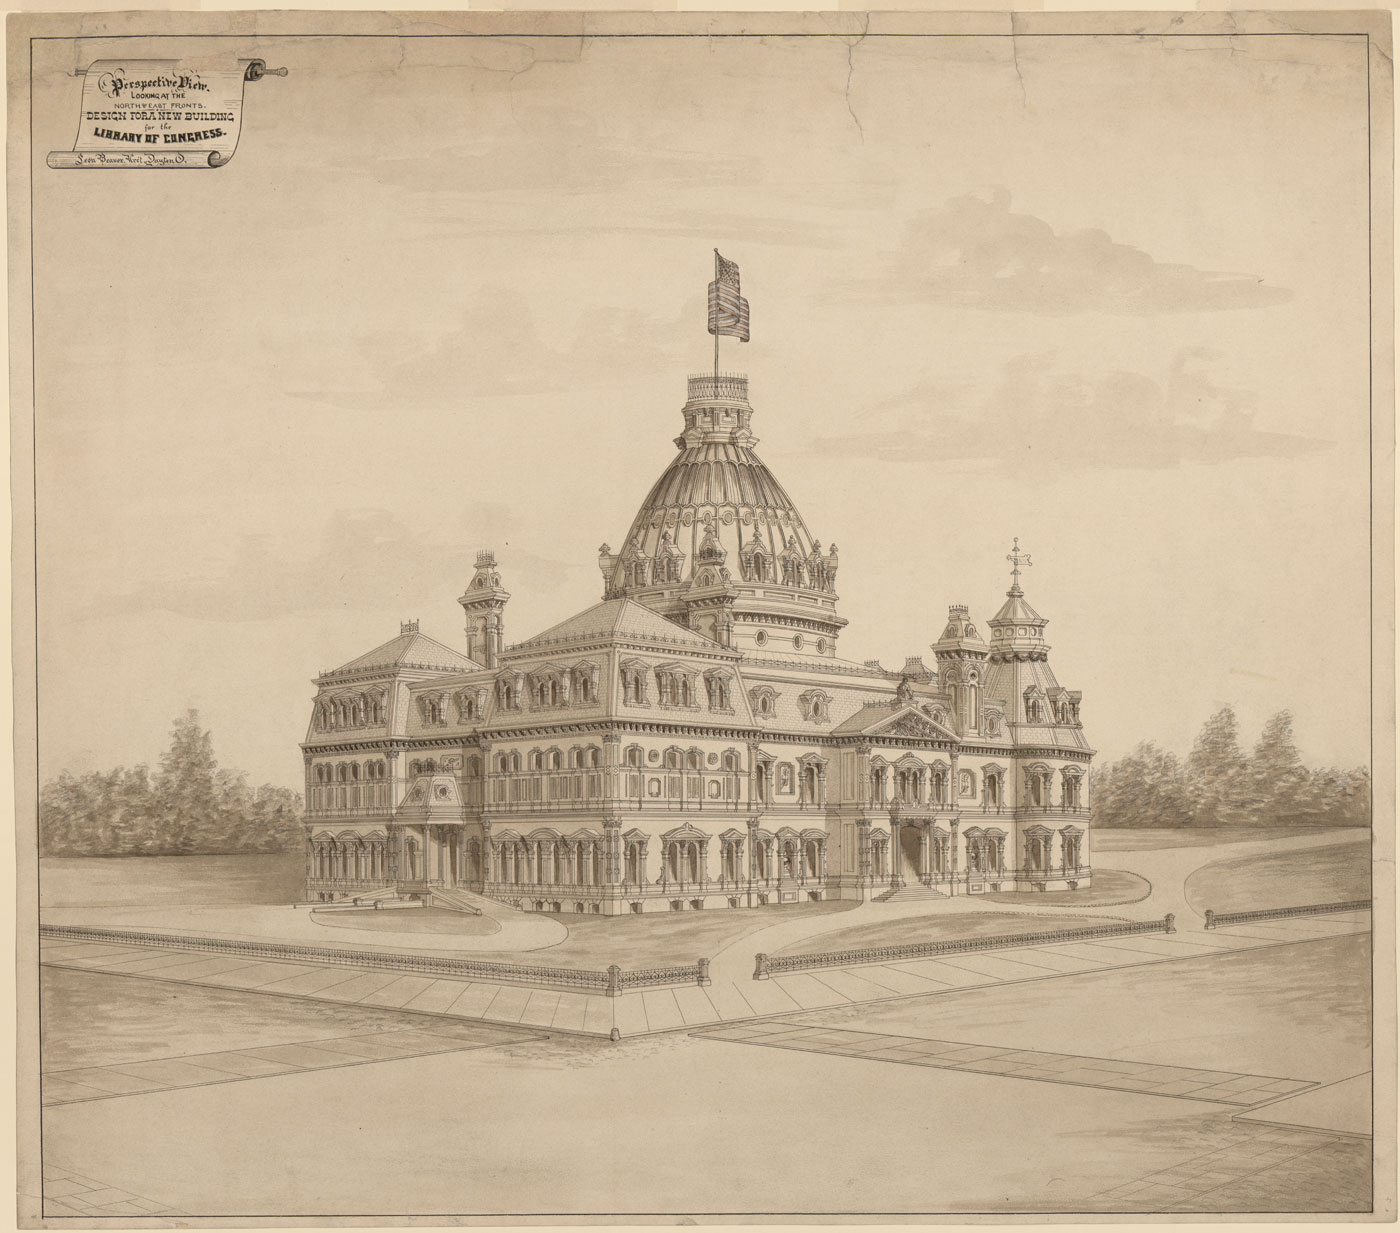 Competition entry for the Library of Congress by Leon Beaver, 1873. Library of Congress, Prints and Photographs Division, LC-DIG-ppmsca-31512.